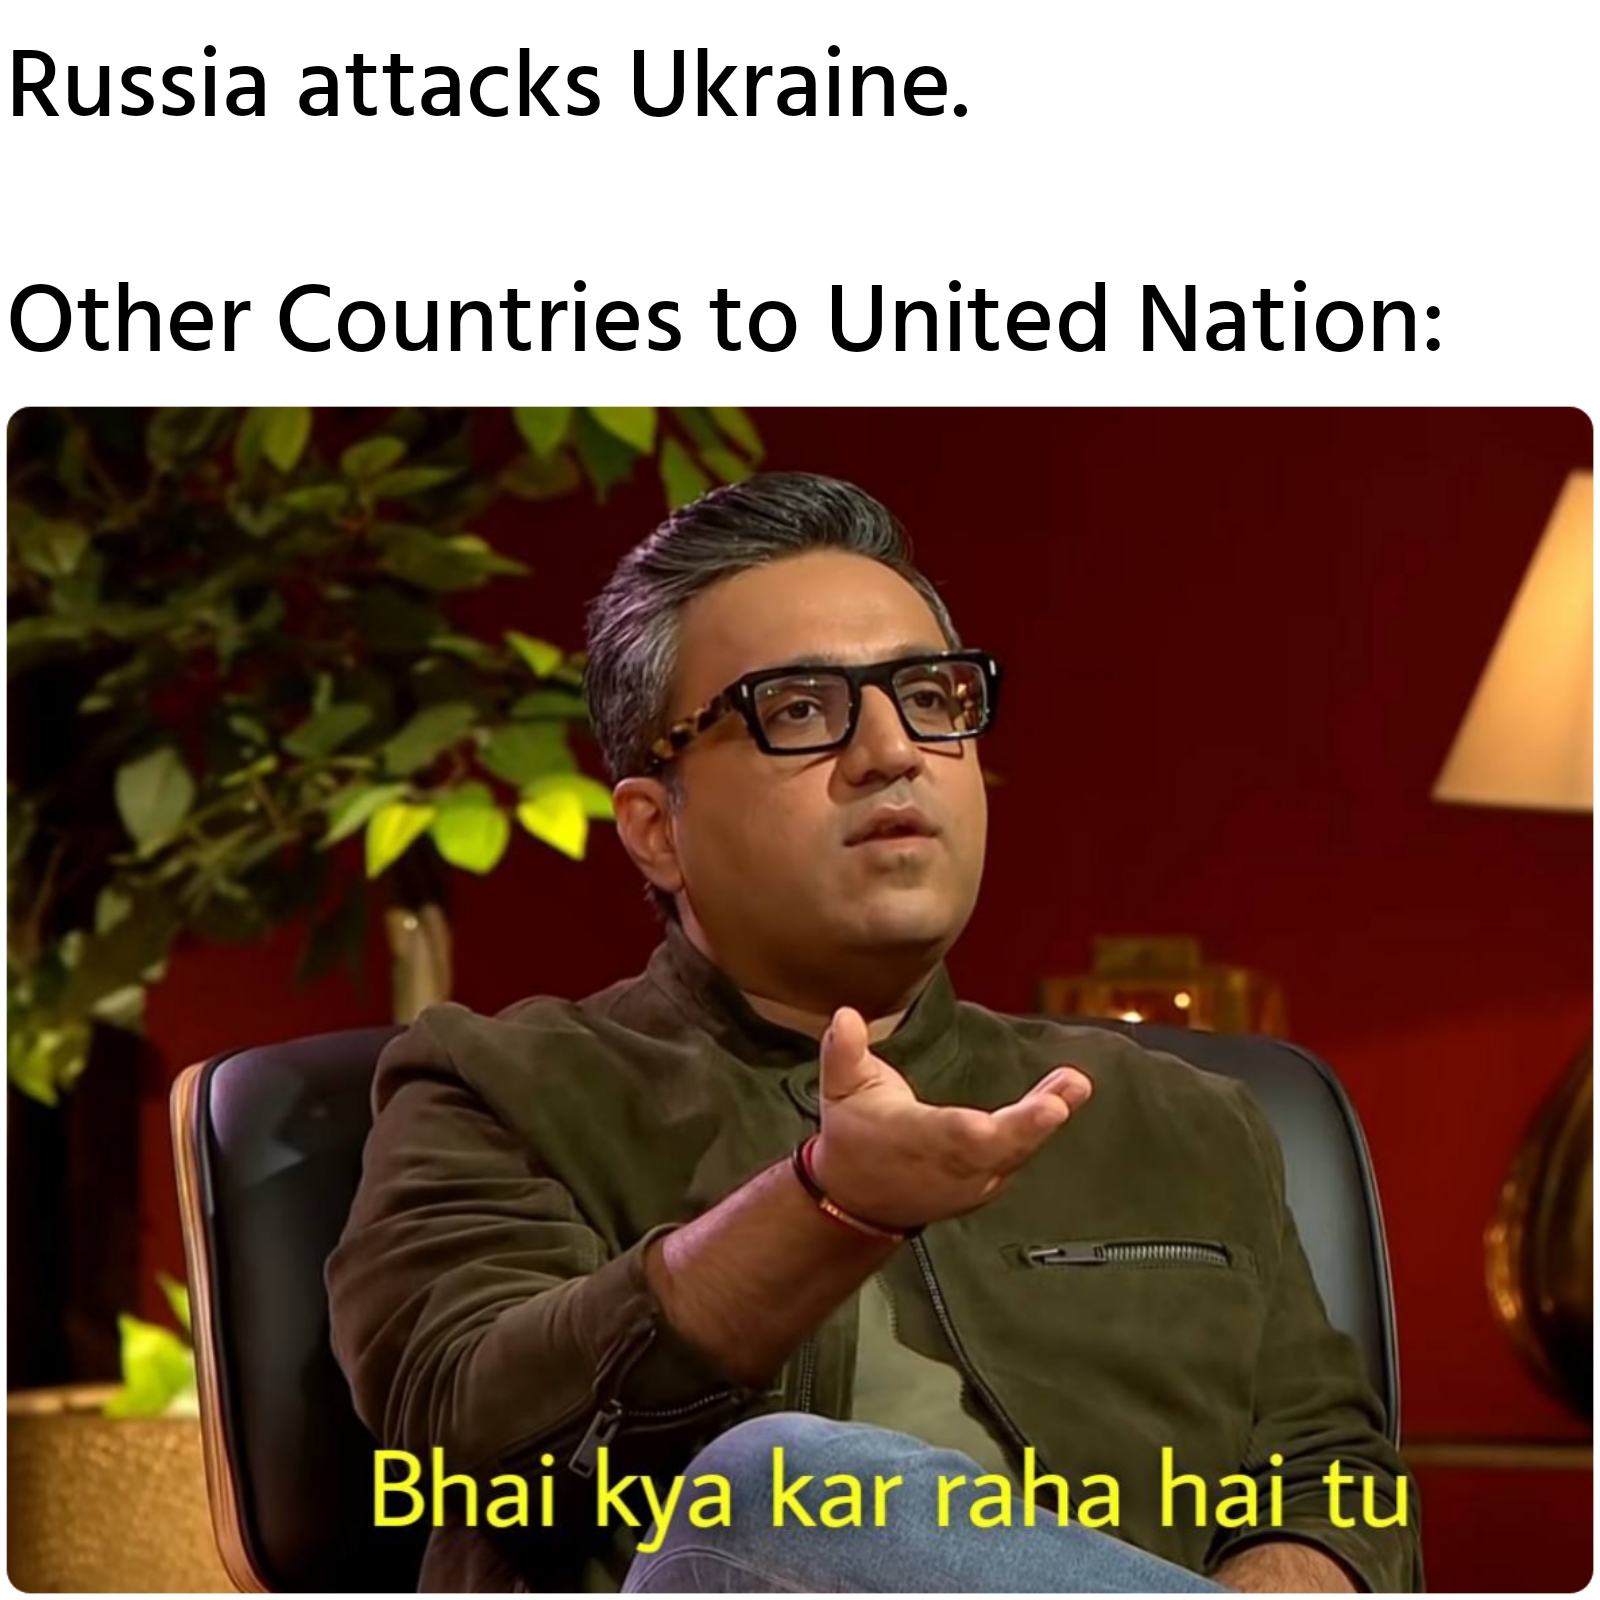 Russia attacks Ukraine. Meanwhile other Countries to United Nation: meme.jpg